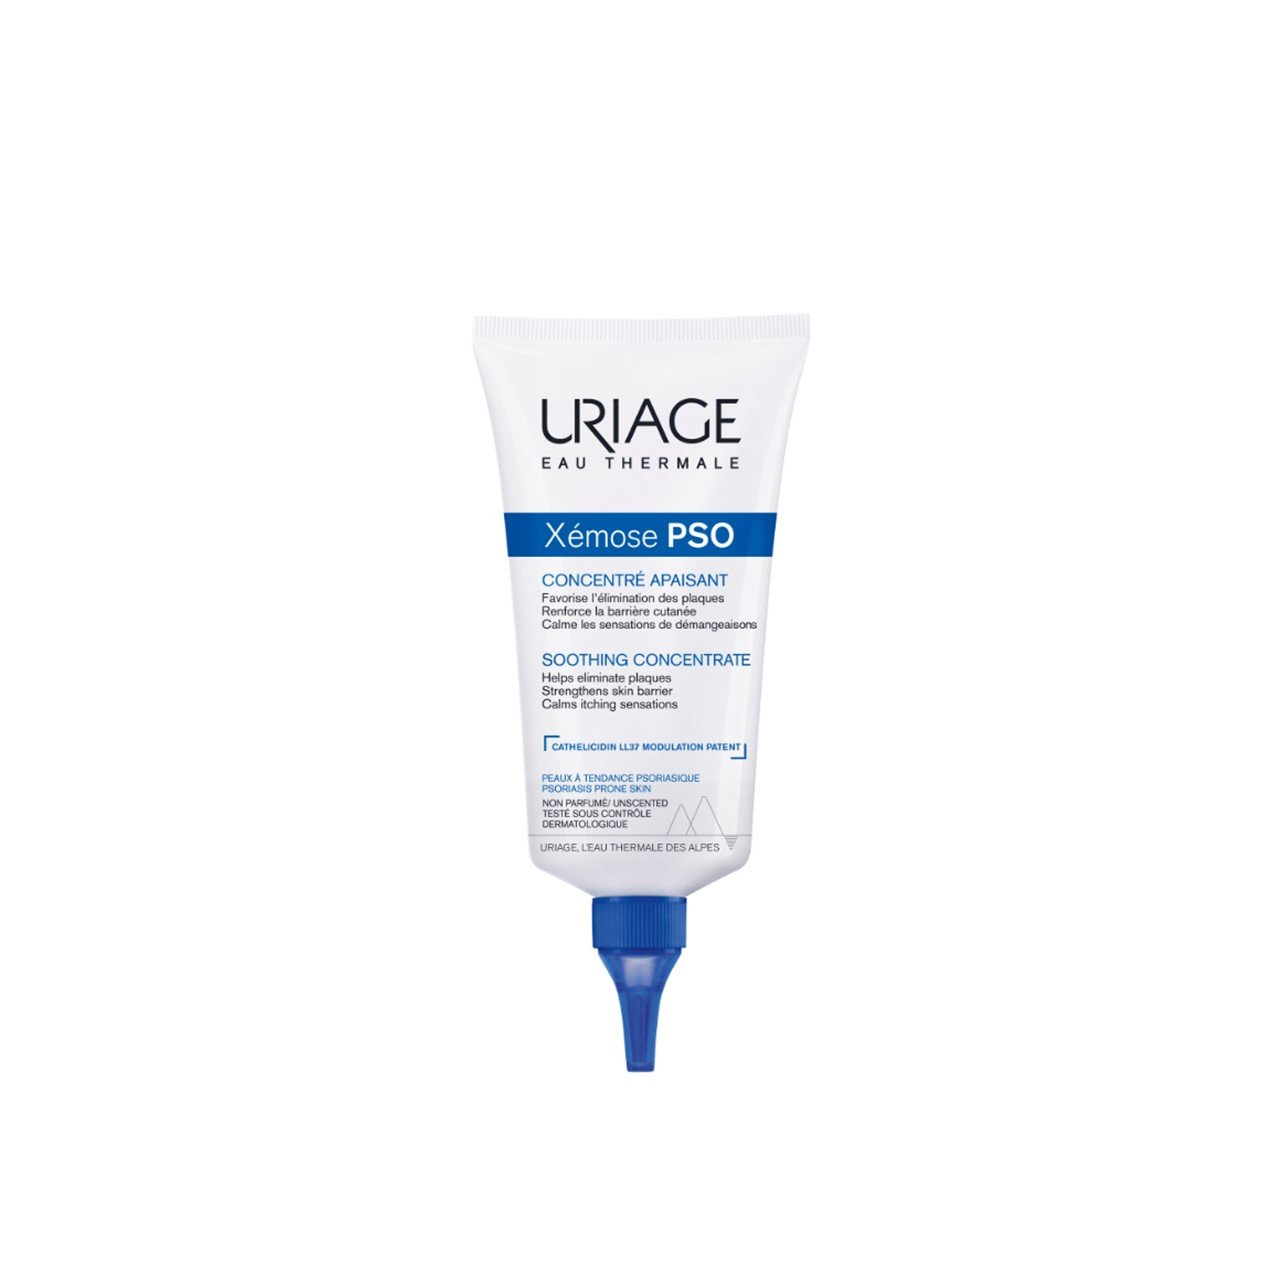 Uriage Xémose PSO Soothing Concentrate 150ml (5.07fl oz)